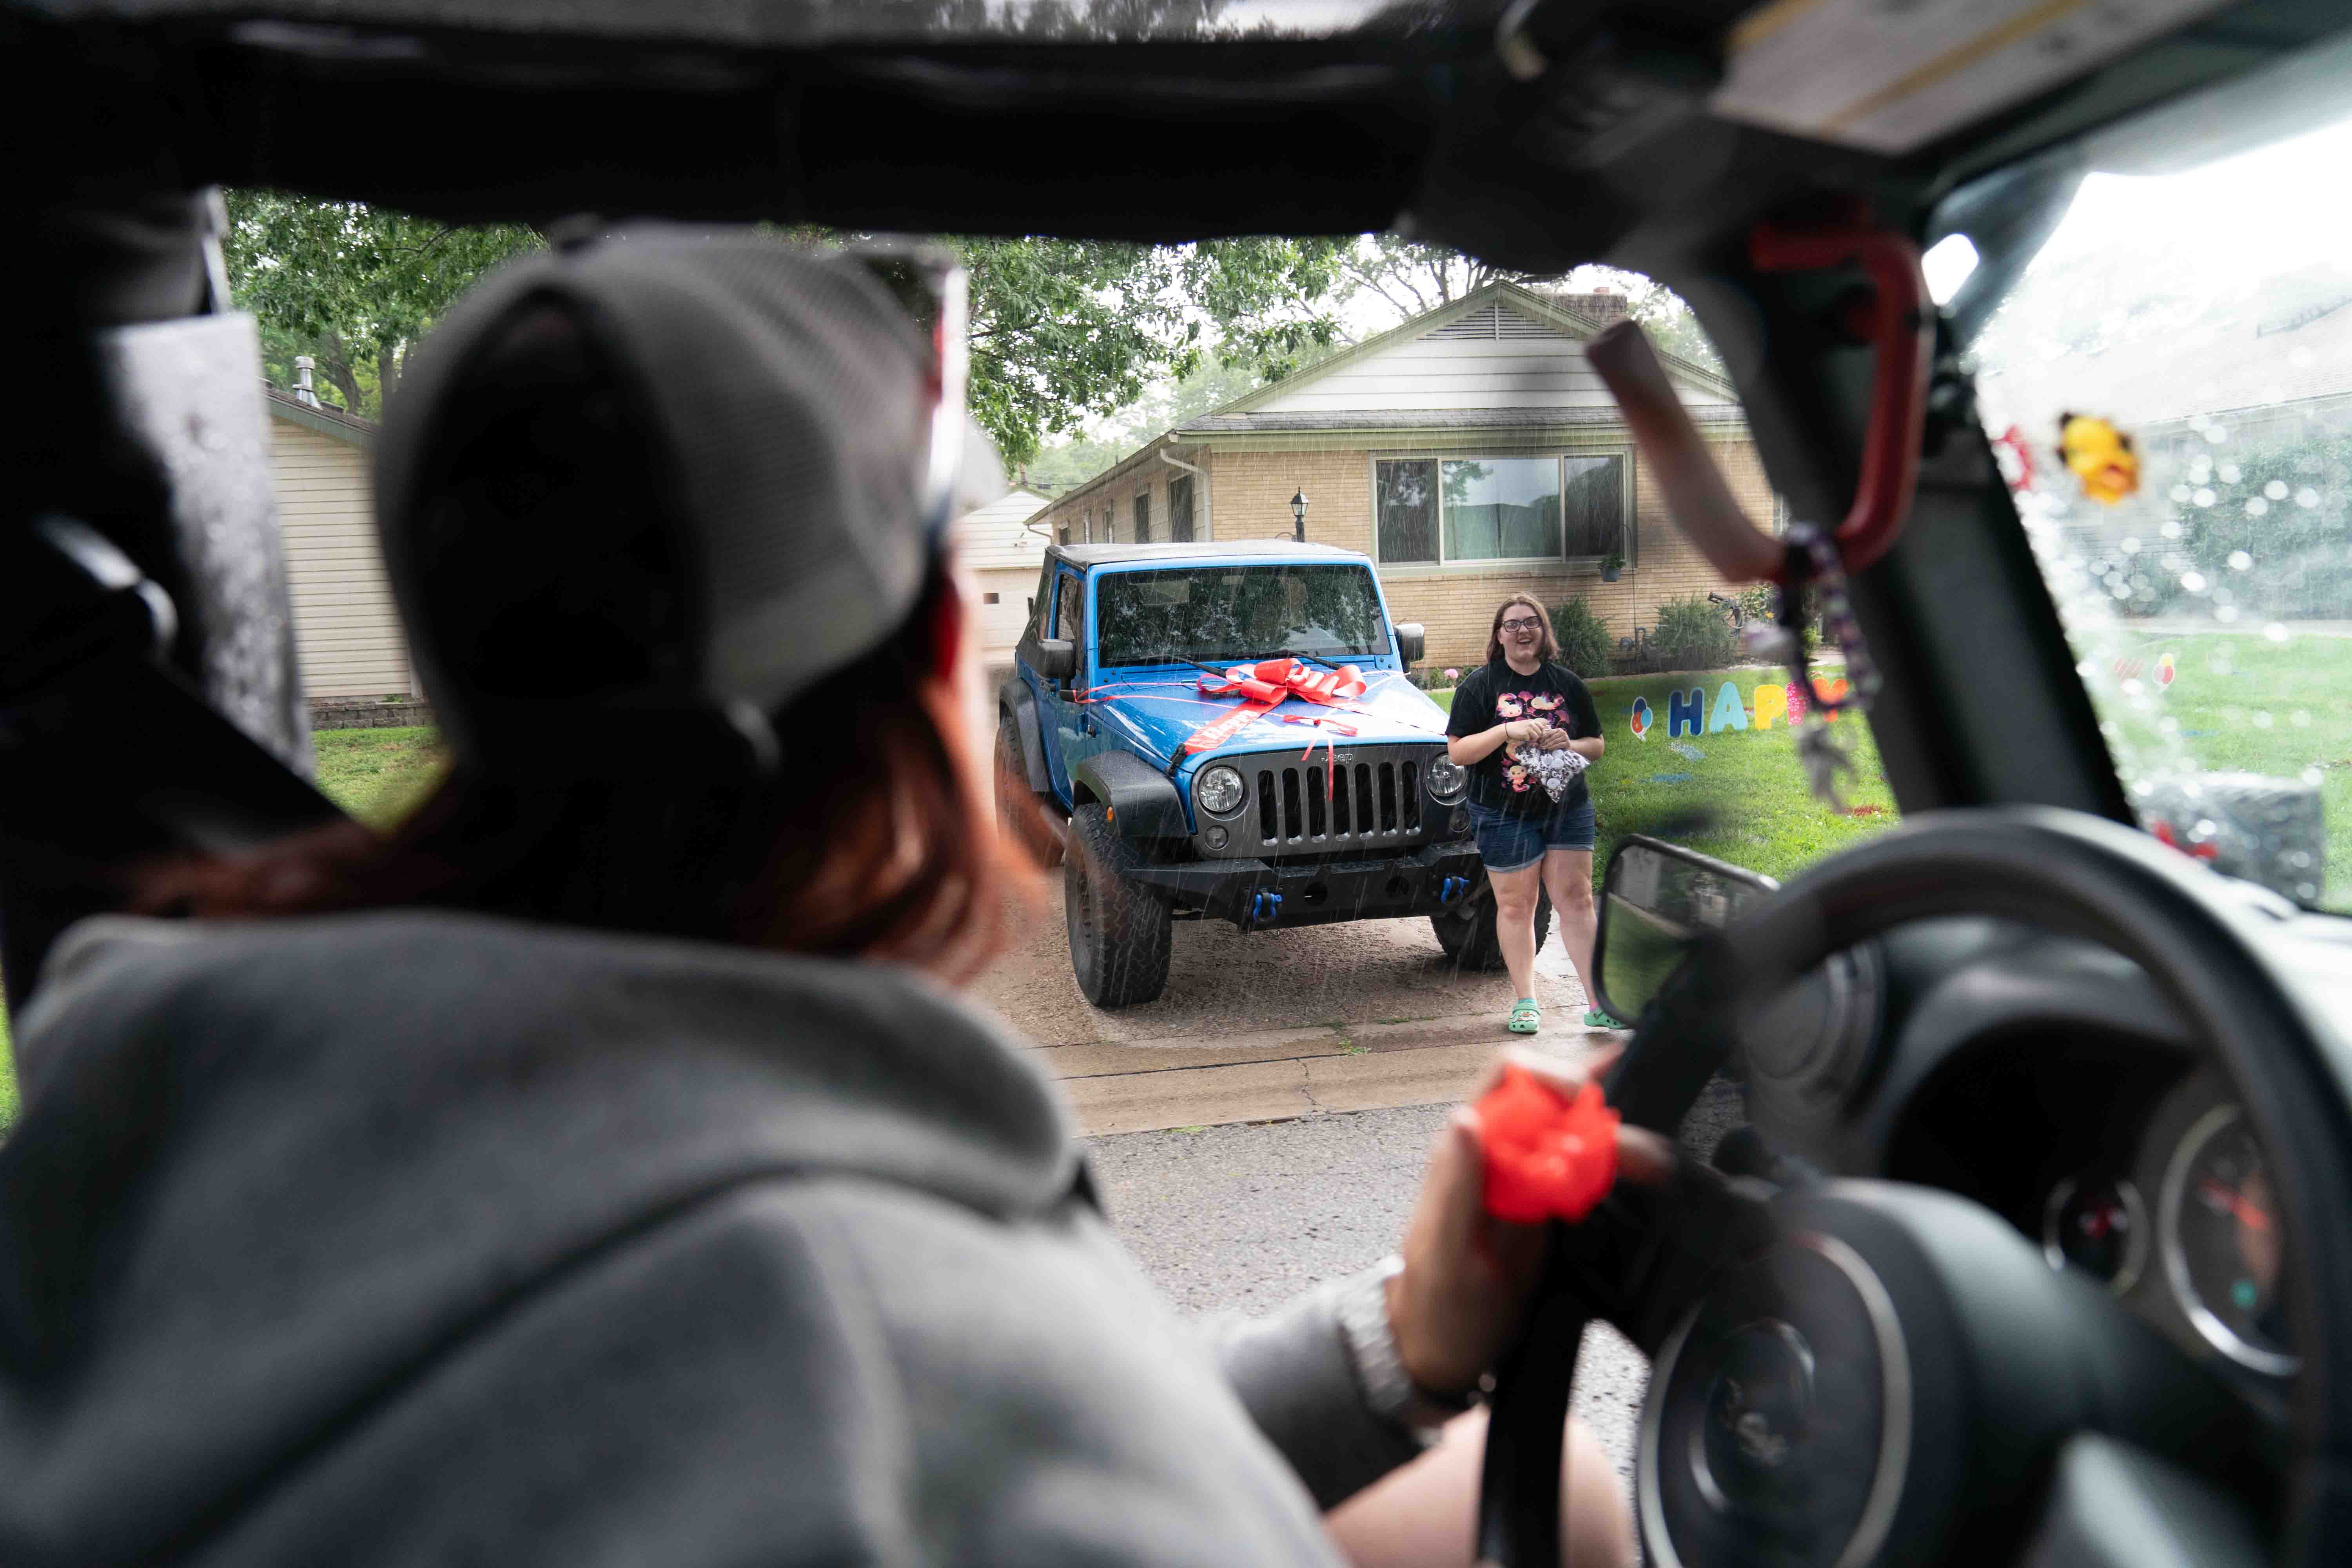 Buying this vehicle comes with a built-in network of friends. Meet the T-Town Jeepers.